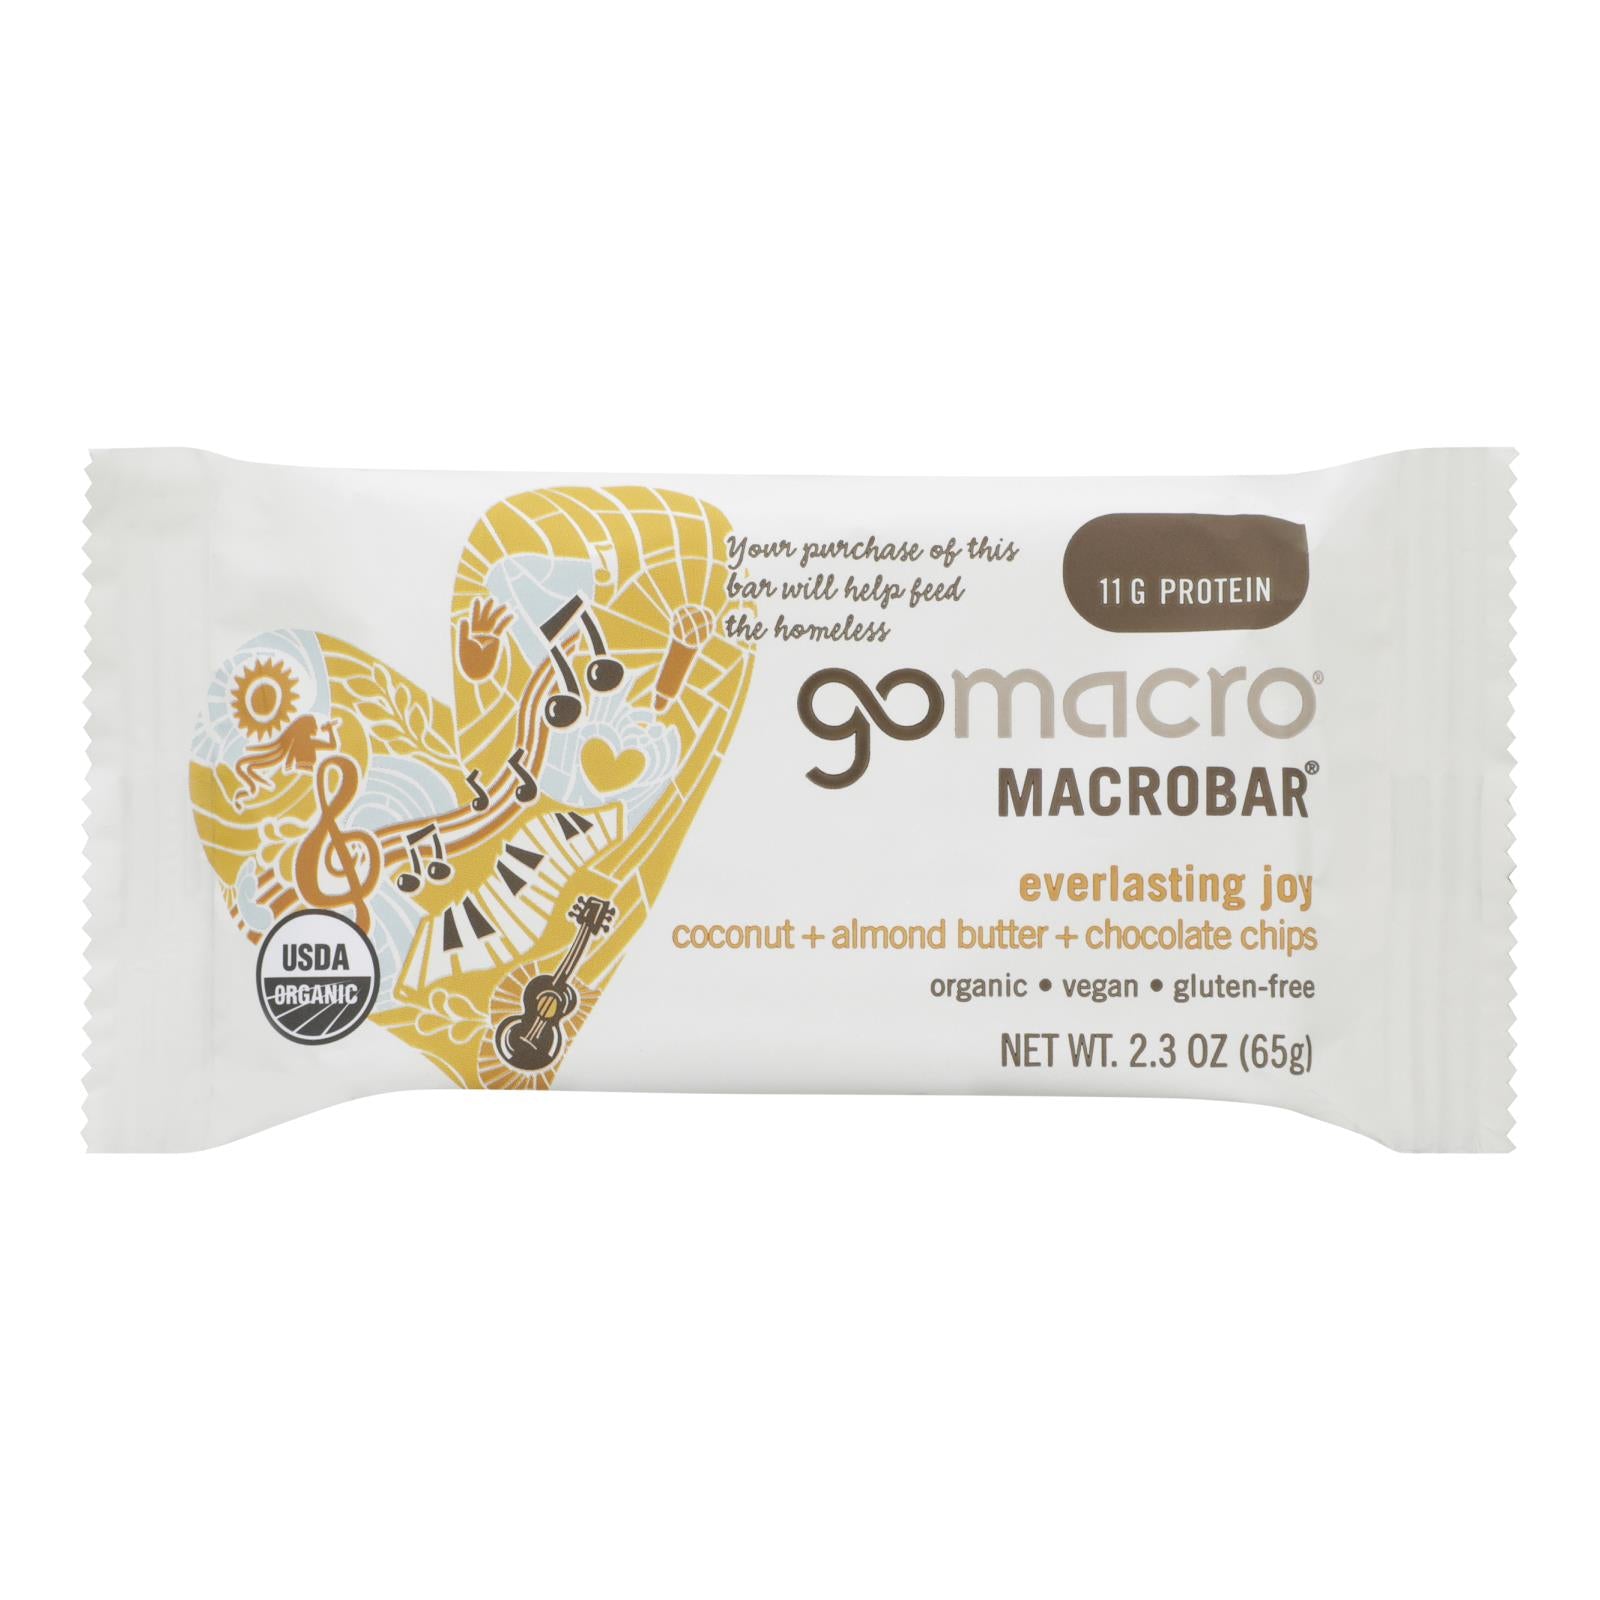 Gomacro Organic Macrobar - Coconut Almond Butter and Chocolate Chips - Case of 12 - 2.3 oz.